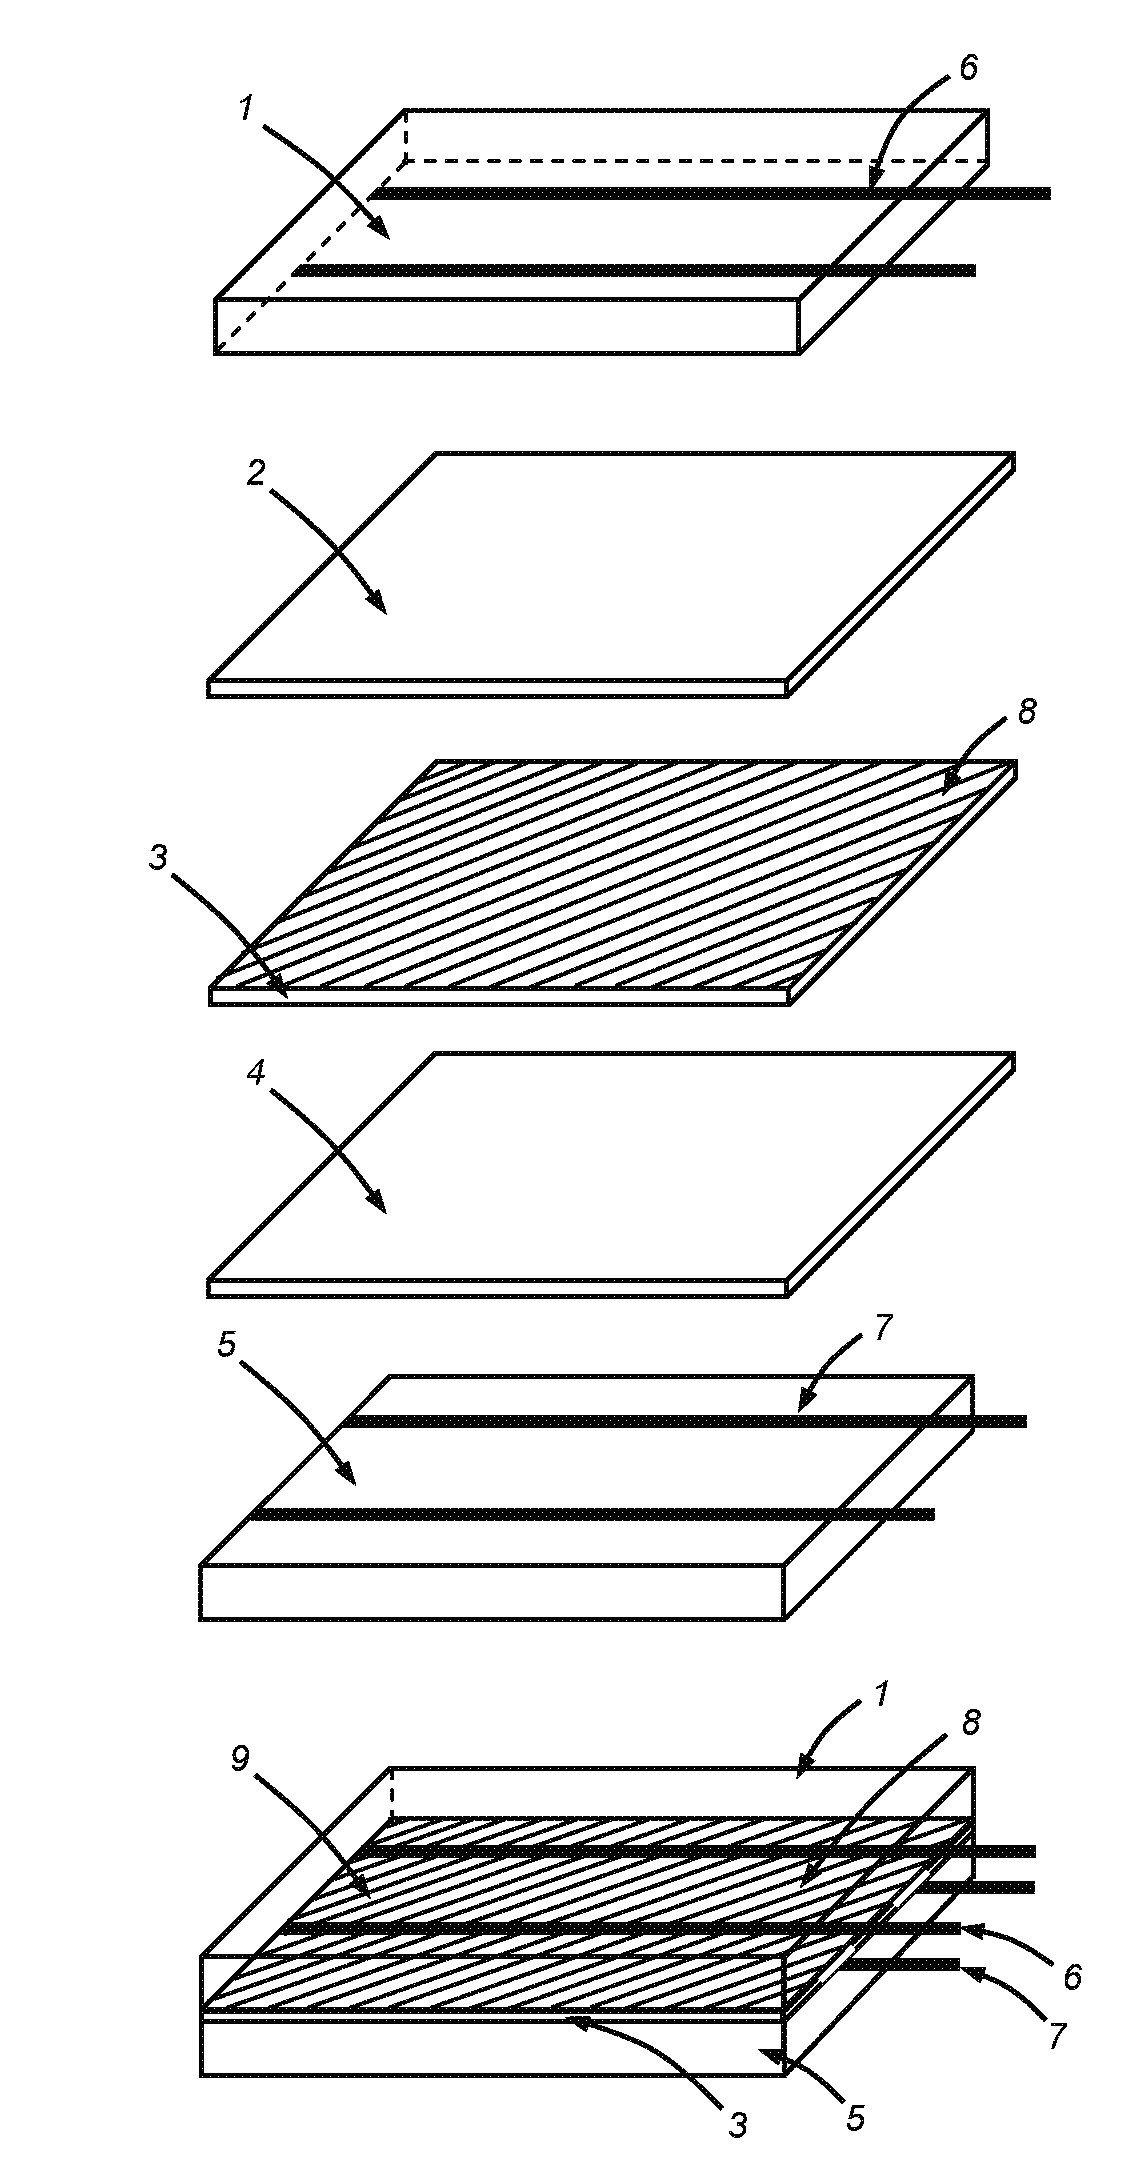 Single-cell encapsulation and flexible-format module architecture and mounting assembly for photovoltaic power generation and method for constructing, inspecting and qualifying the same